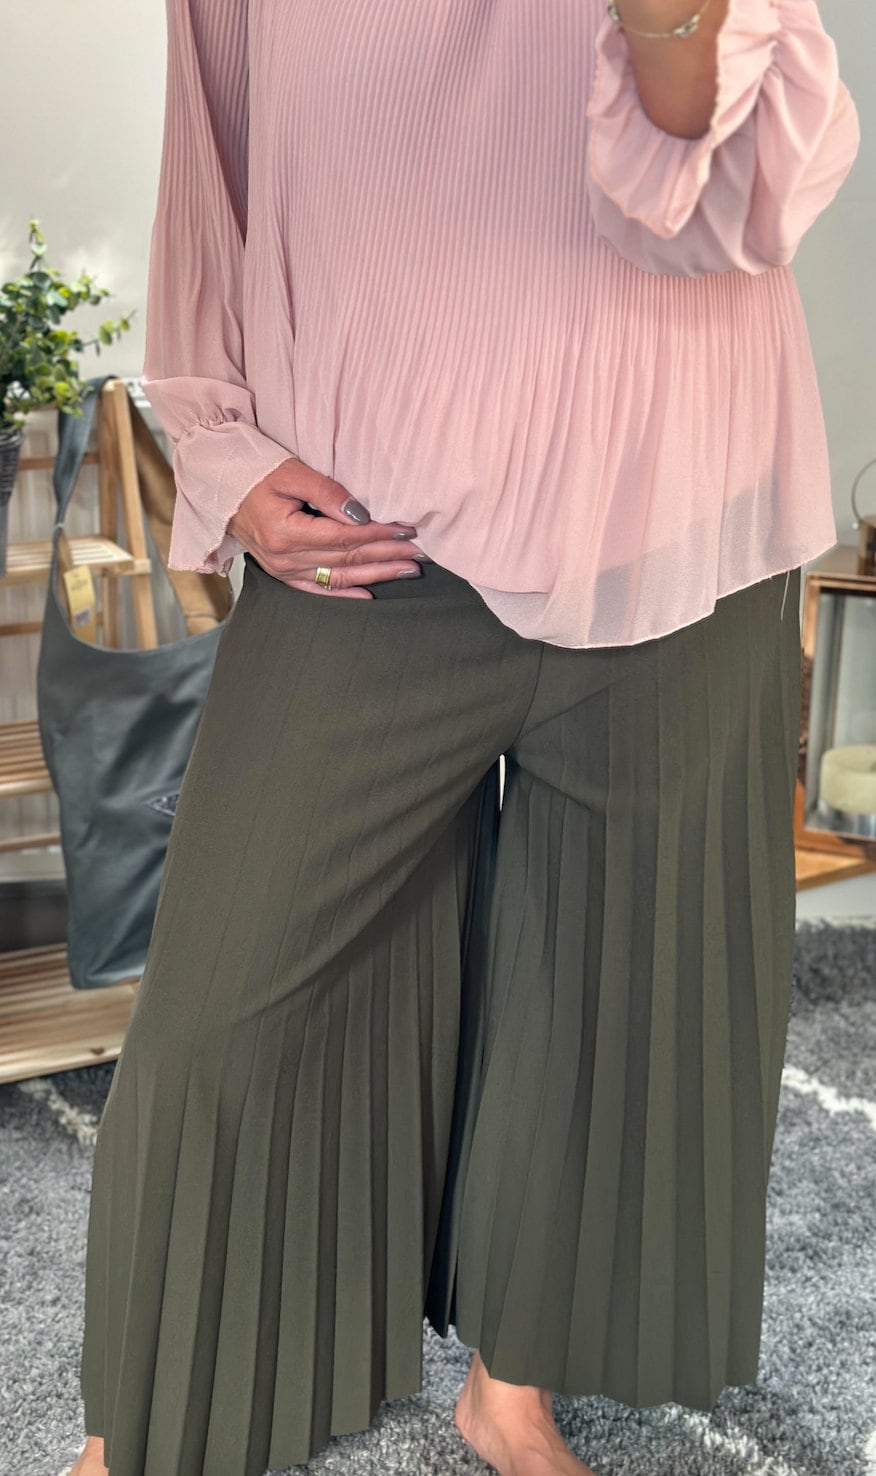 Made in Italy Khaki Culottes Wide Leg Chinos Pants Trousers, Mid Waist, Pleated Ankle-Length Comfort Plain